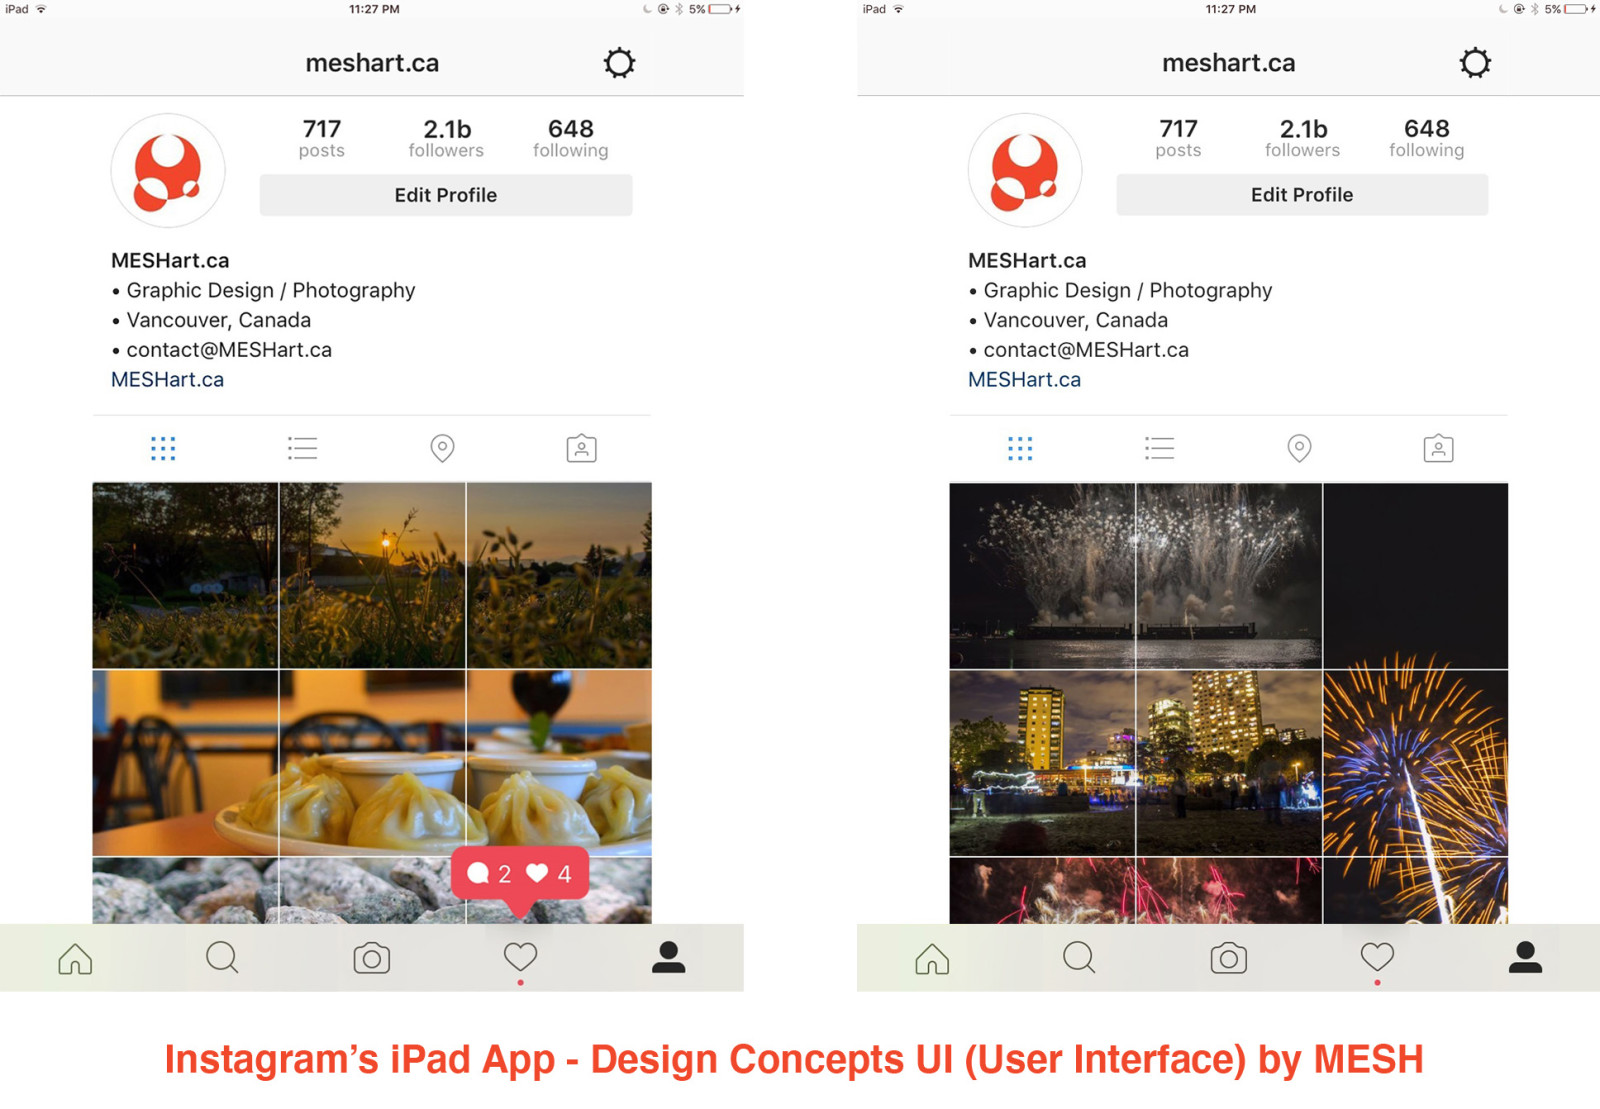 ©-MESHart.ca-2014-2020-Nimesh_Devkota-Instagram's-iPad-App-Design-UI-(User-Interface)-for-the-User-Interface-Concepts-by-MESH.No-Copying-Without-Explicit-Permission-Version-3